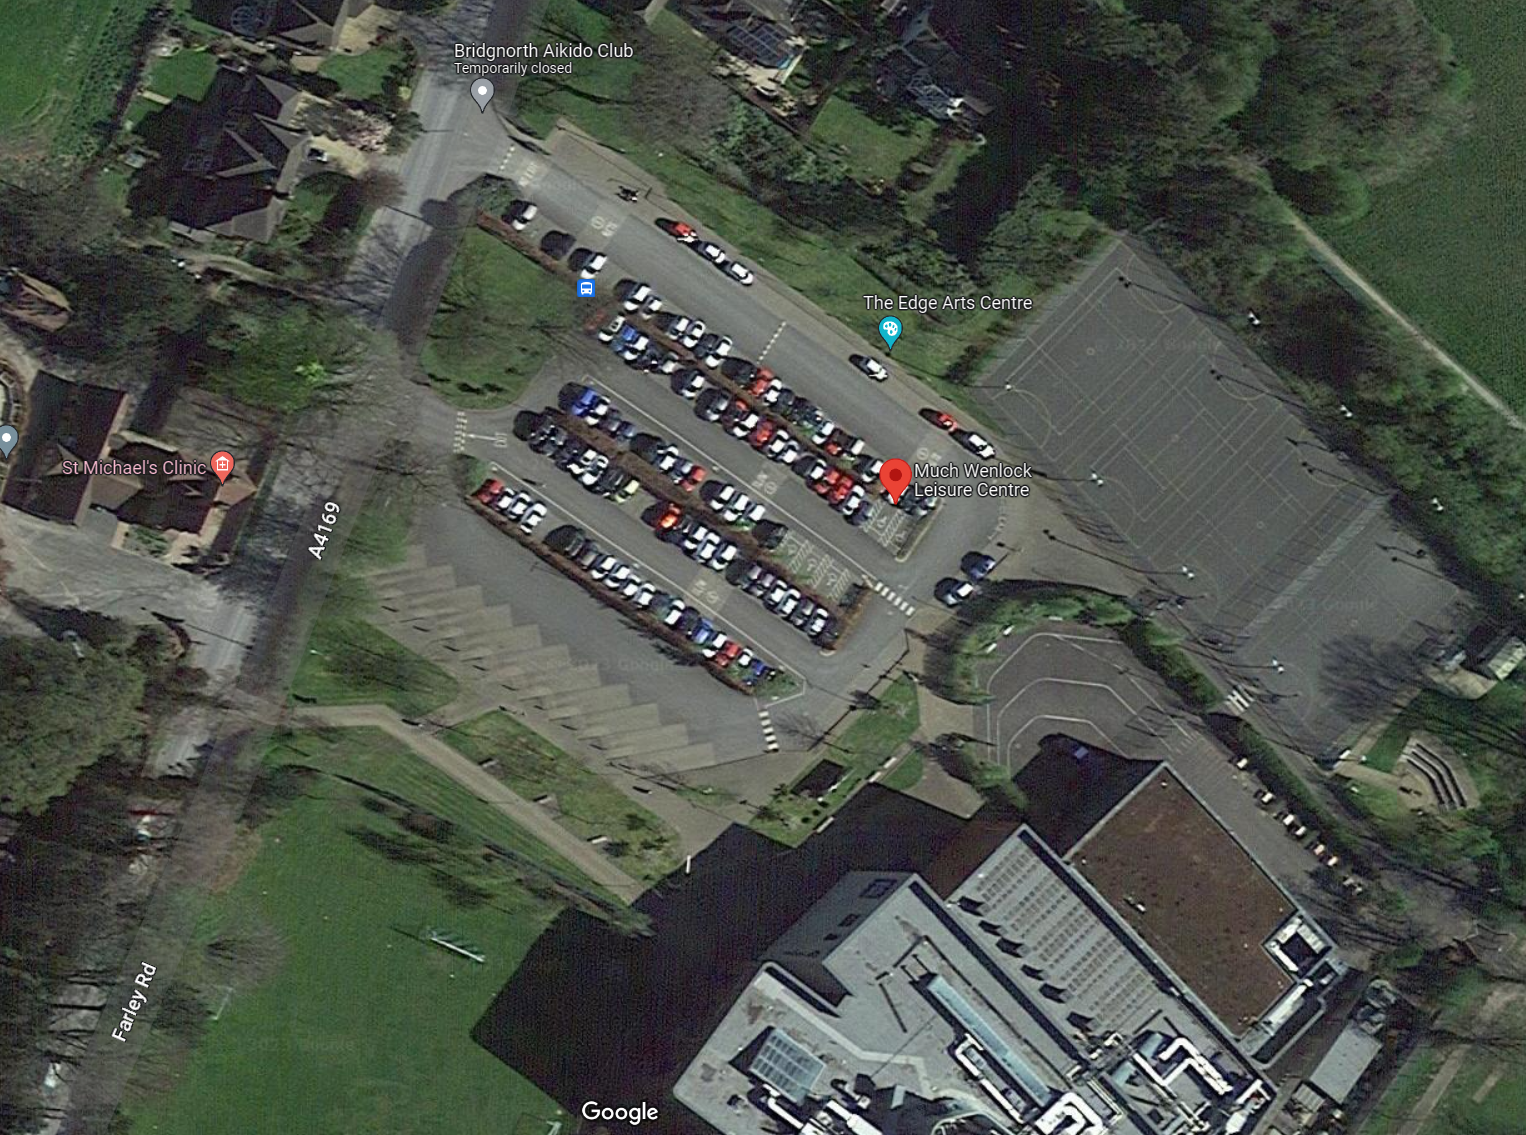 Aerial view of a parking lot

Description automatically generated with medium confidence